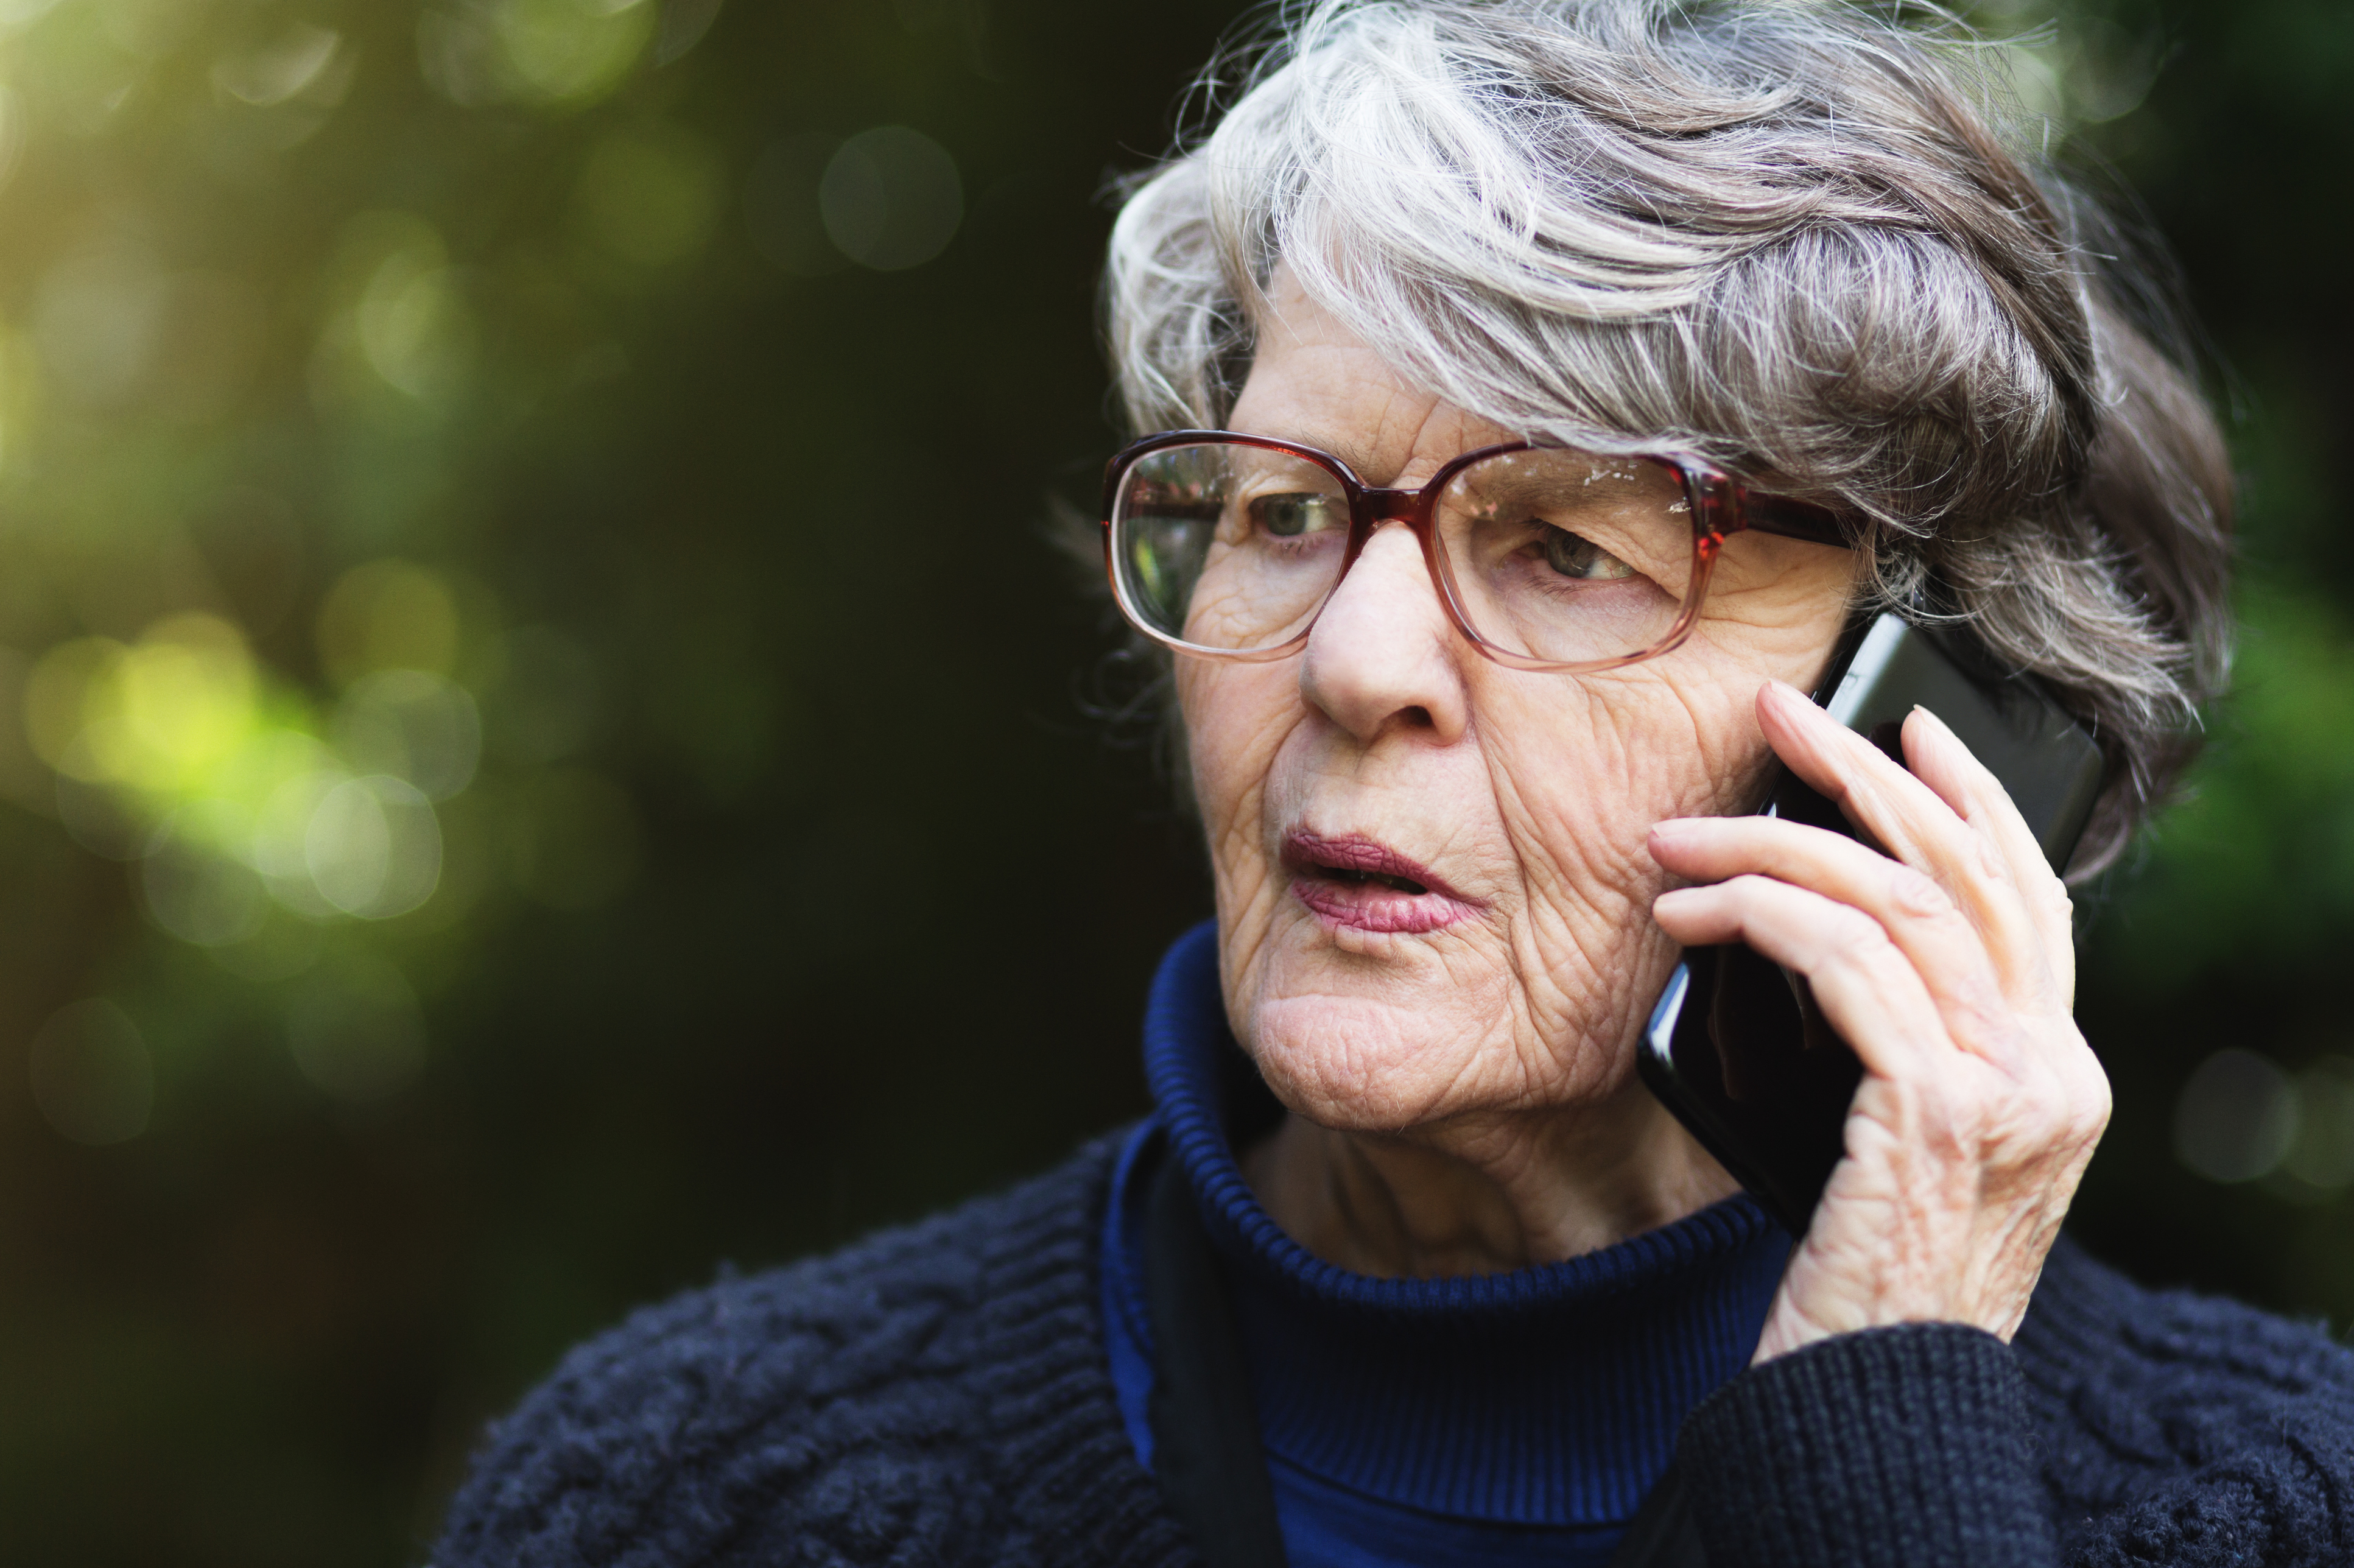 Serious senior woman talking on phone outdoors seems concerned